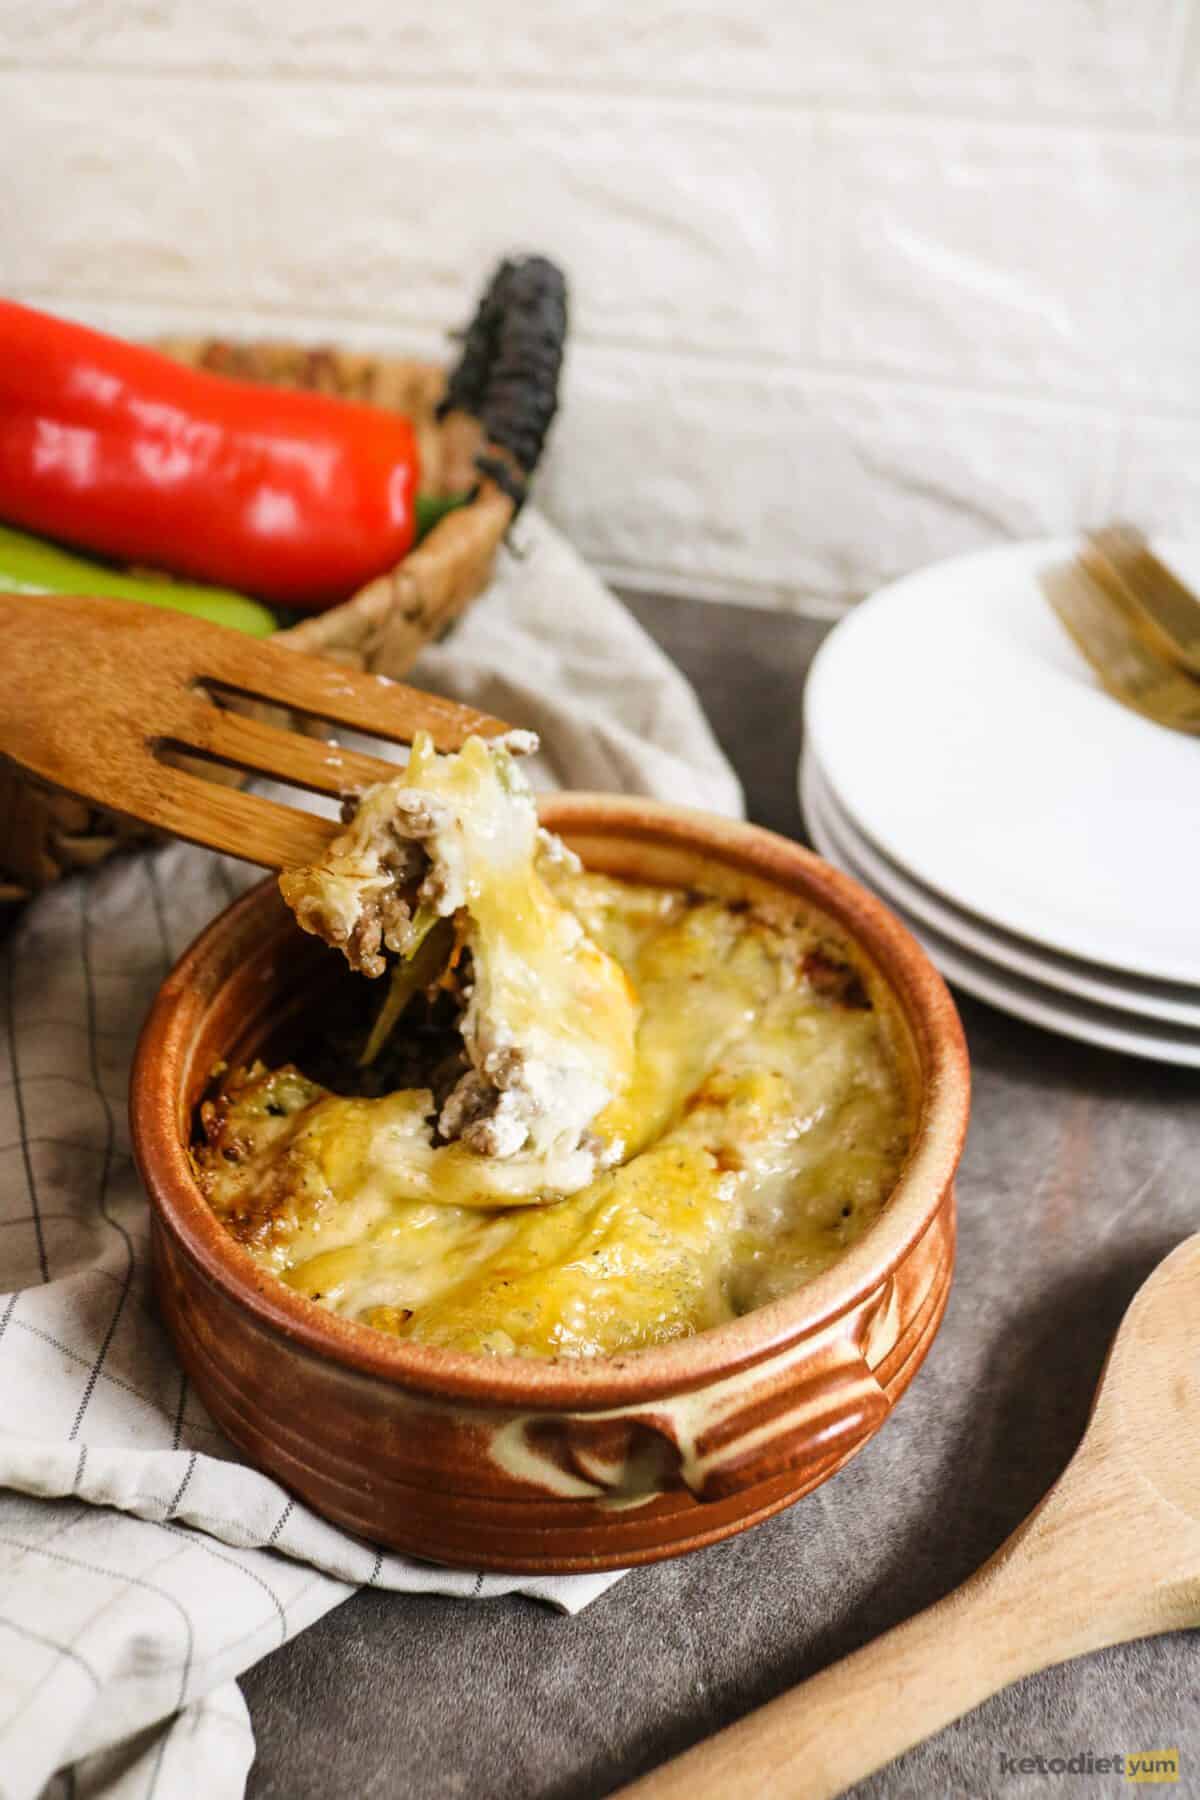 Brown casserole dish with a wooden spoon pulling a serving of cheesy casserole out